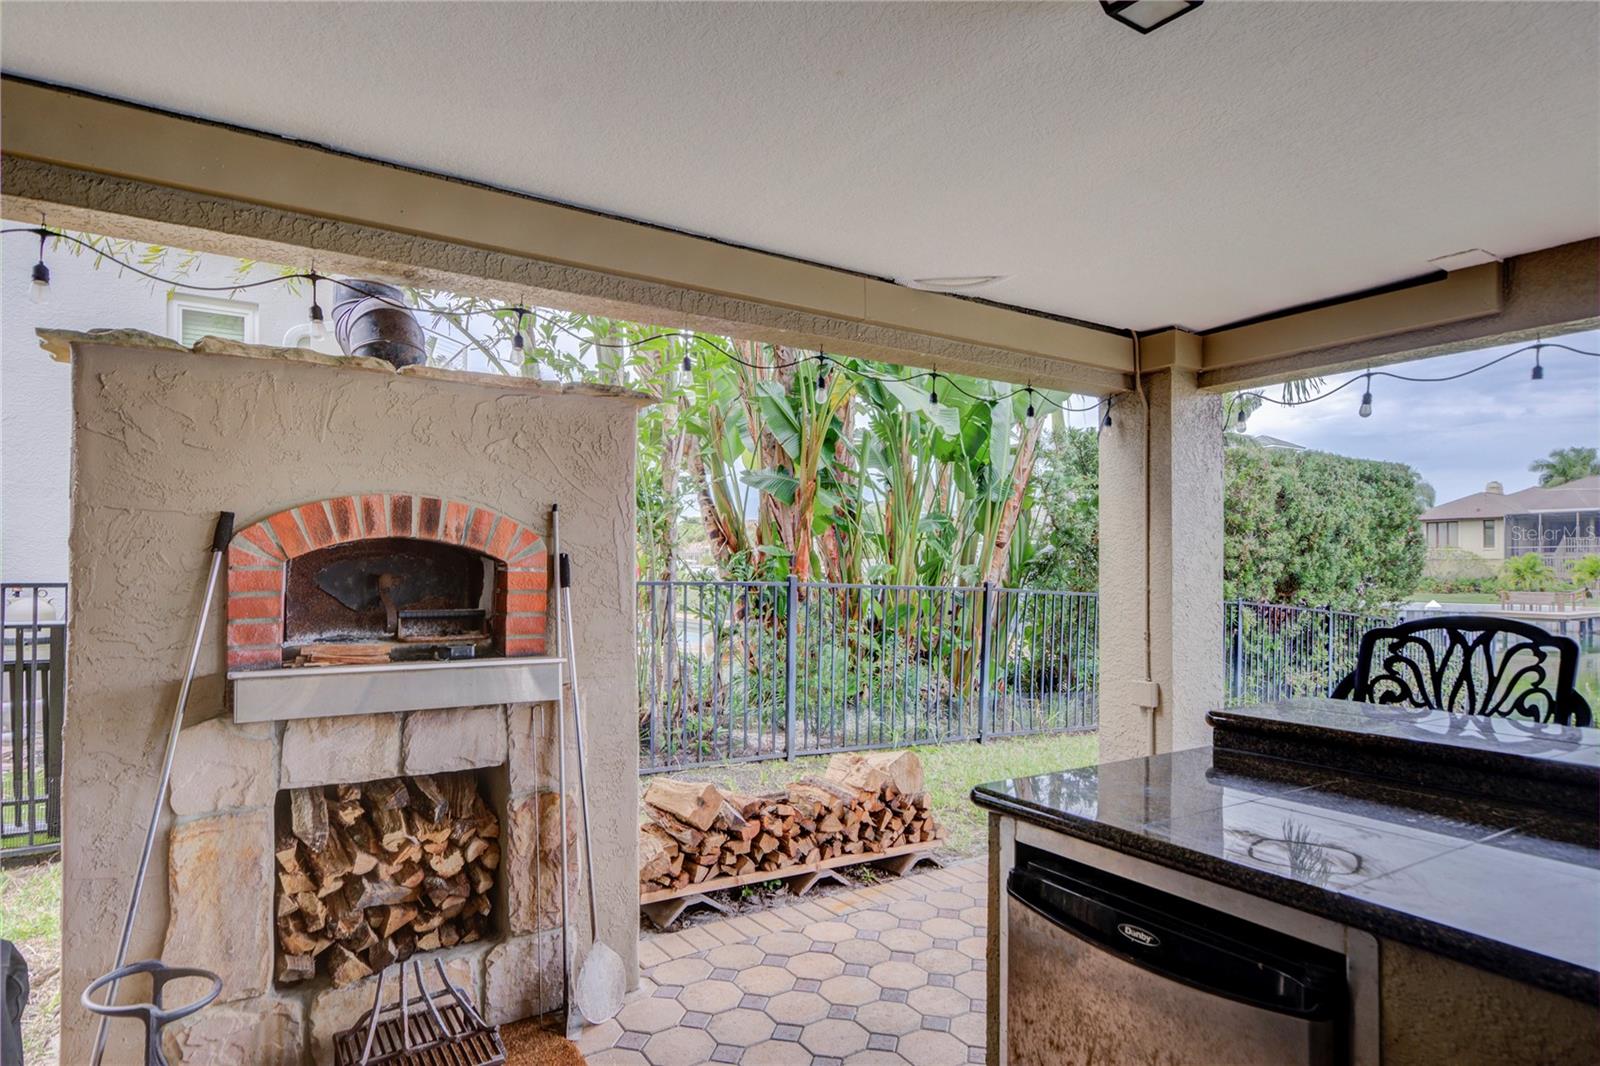 outdoor kitchen with pizza maker